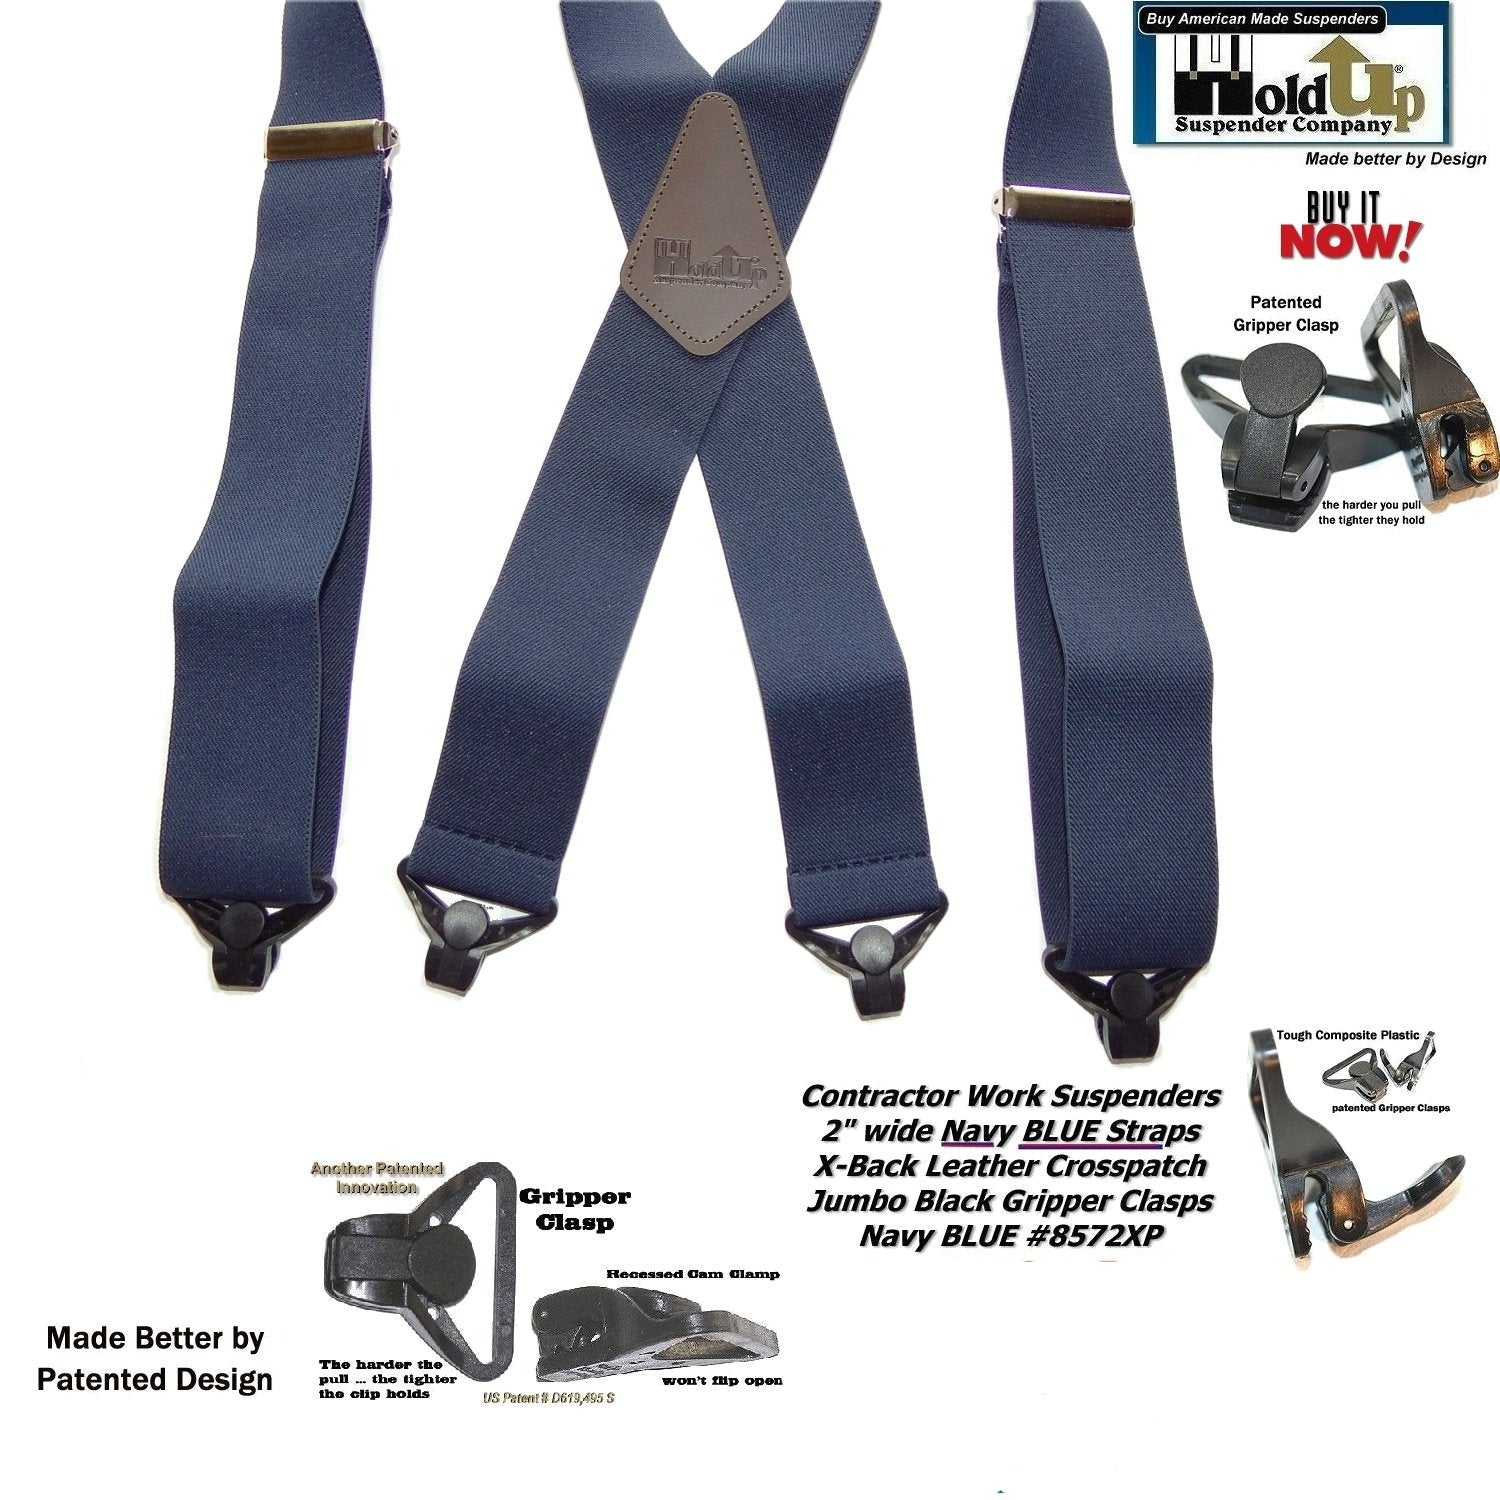 What Are Sheet Suspenders and Is There A Better Alternative?